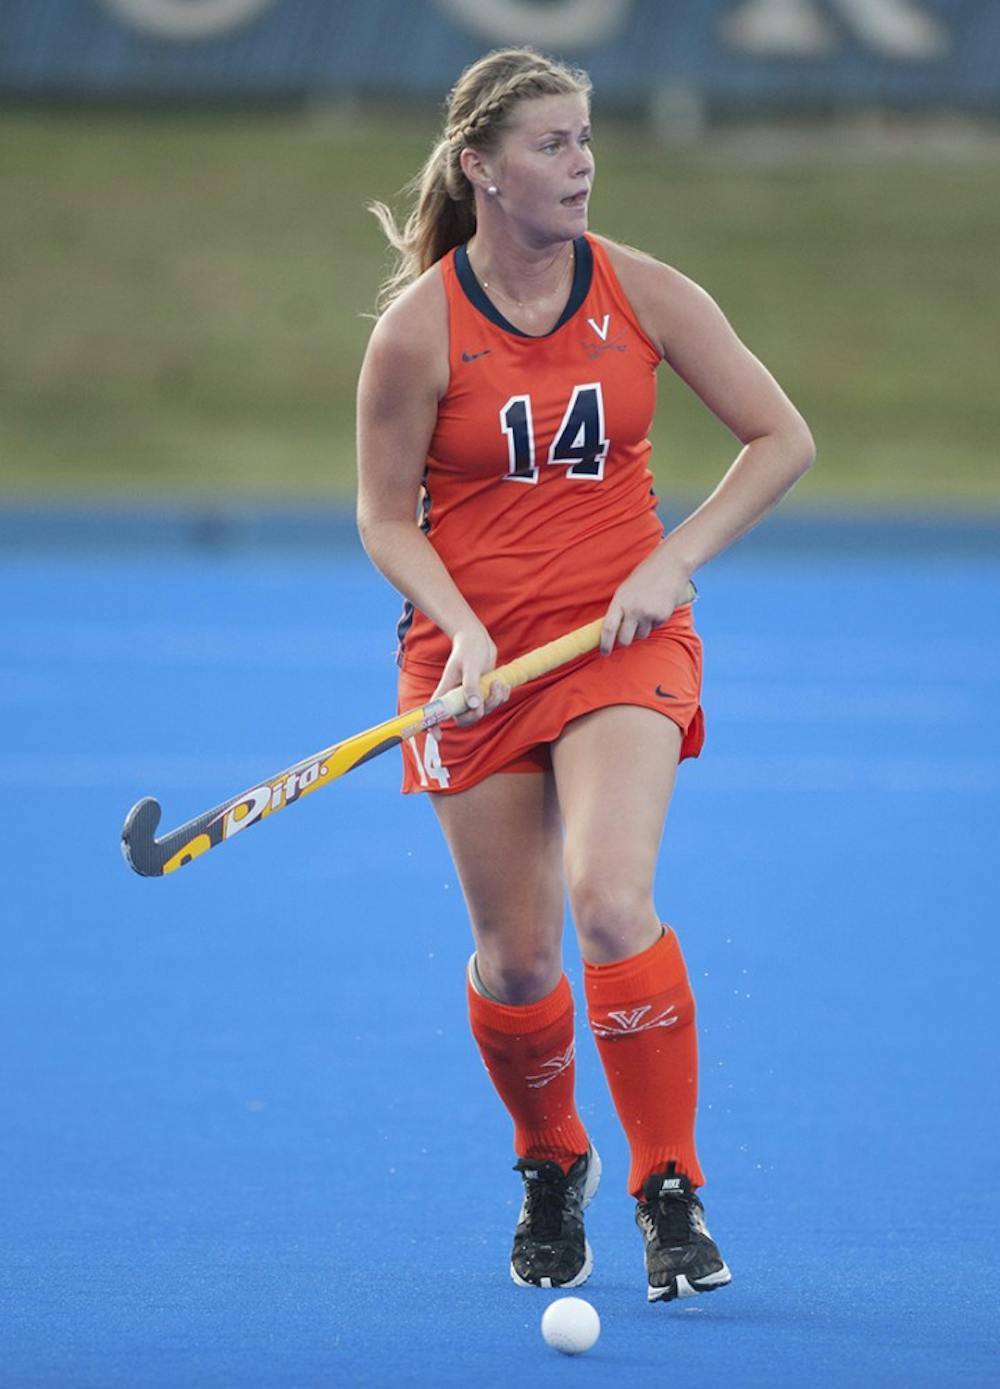 Junior defender Emily Faught and the Virginia field hockey team play Boston College Saturday at 1 p.m.